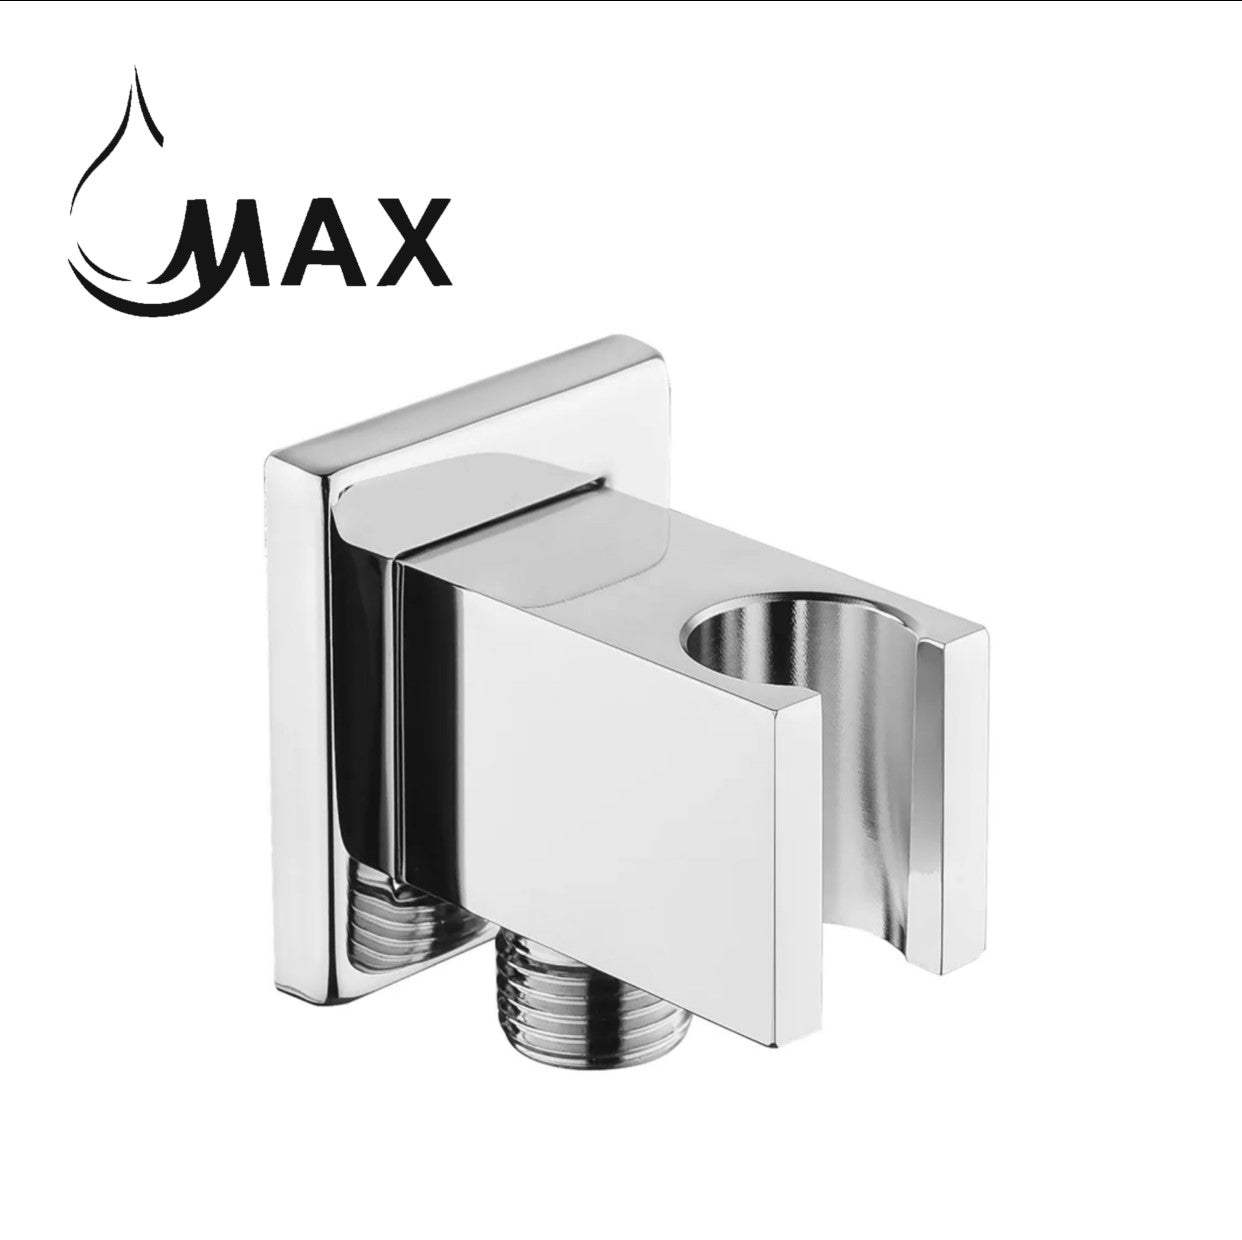 Shower Outlet Elbow With Holder Wall Mounted Chrome Finish